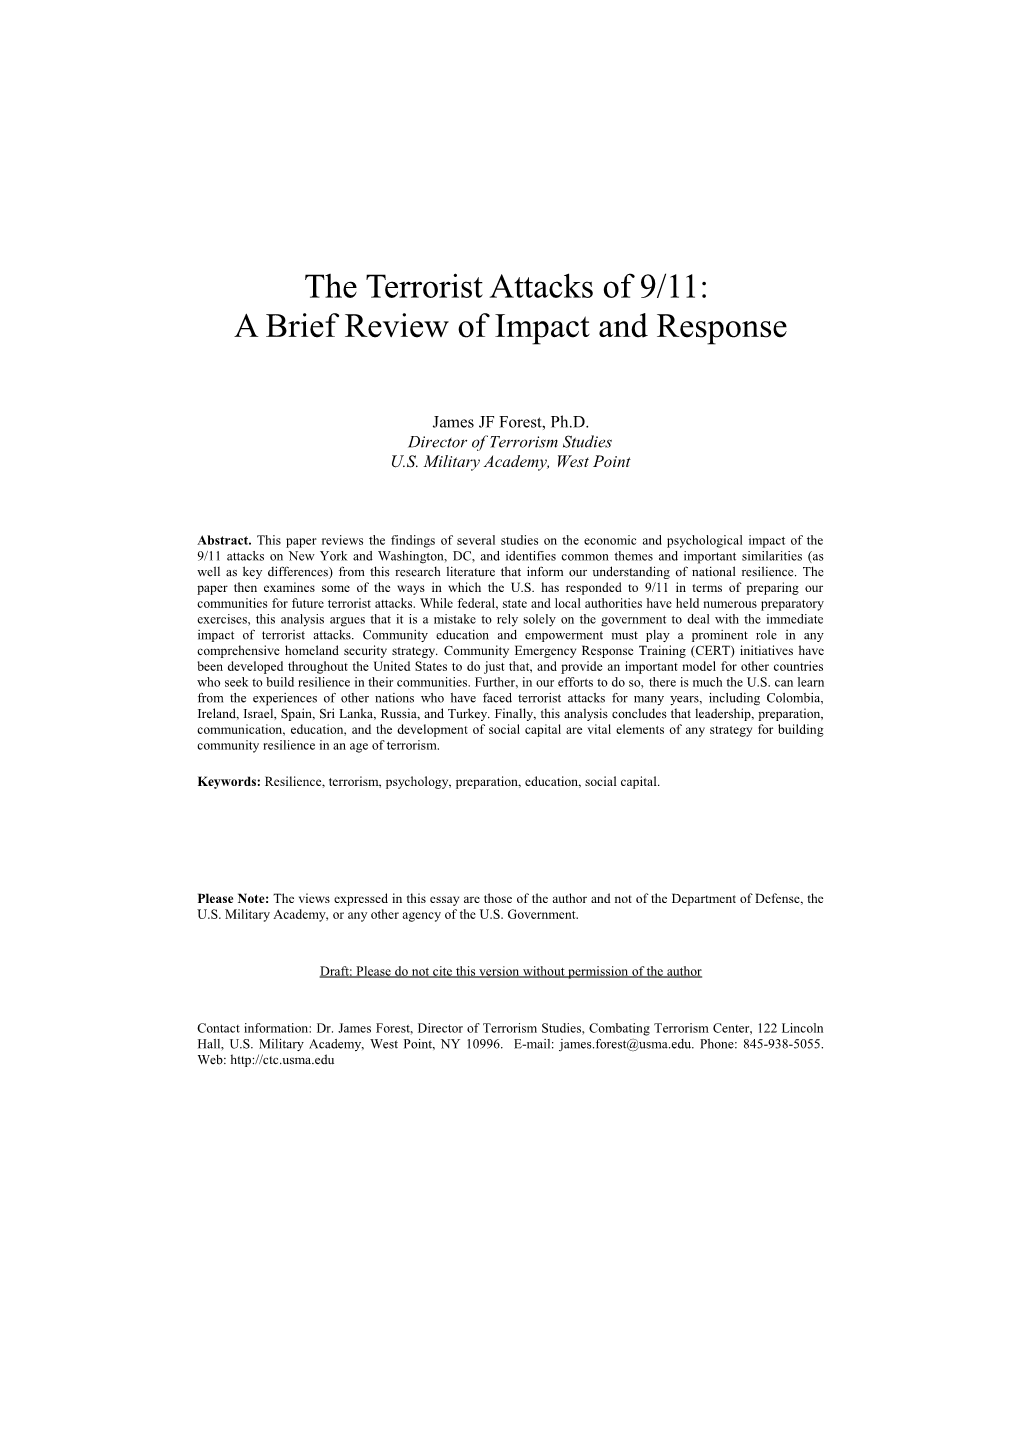 Economic and Psychological Impact of the 9/11 Attacks in the United States